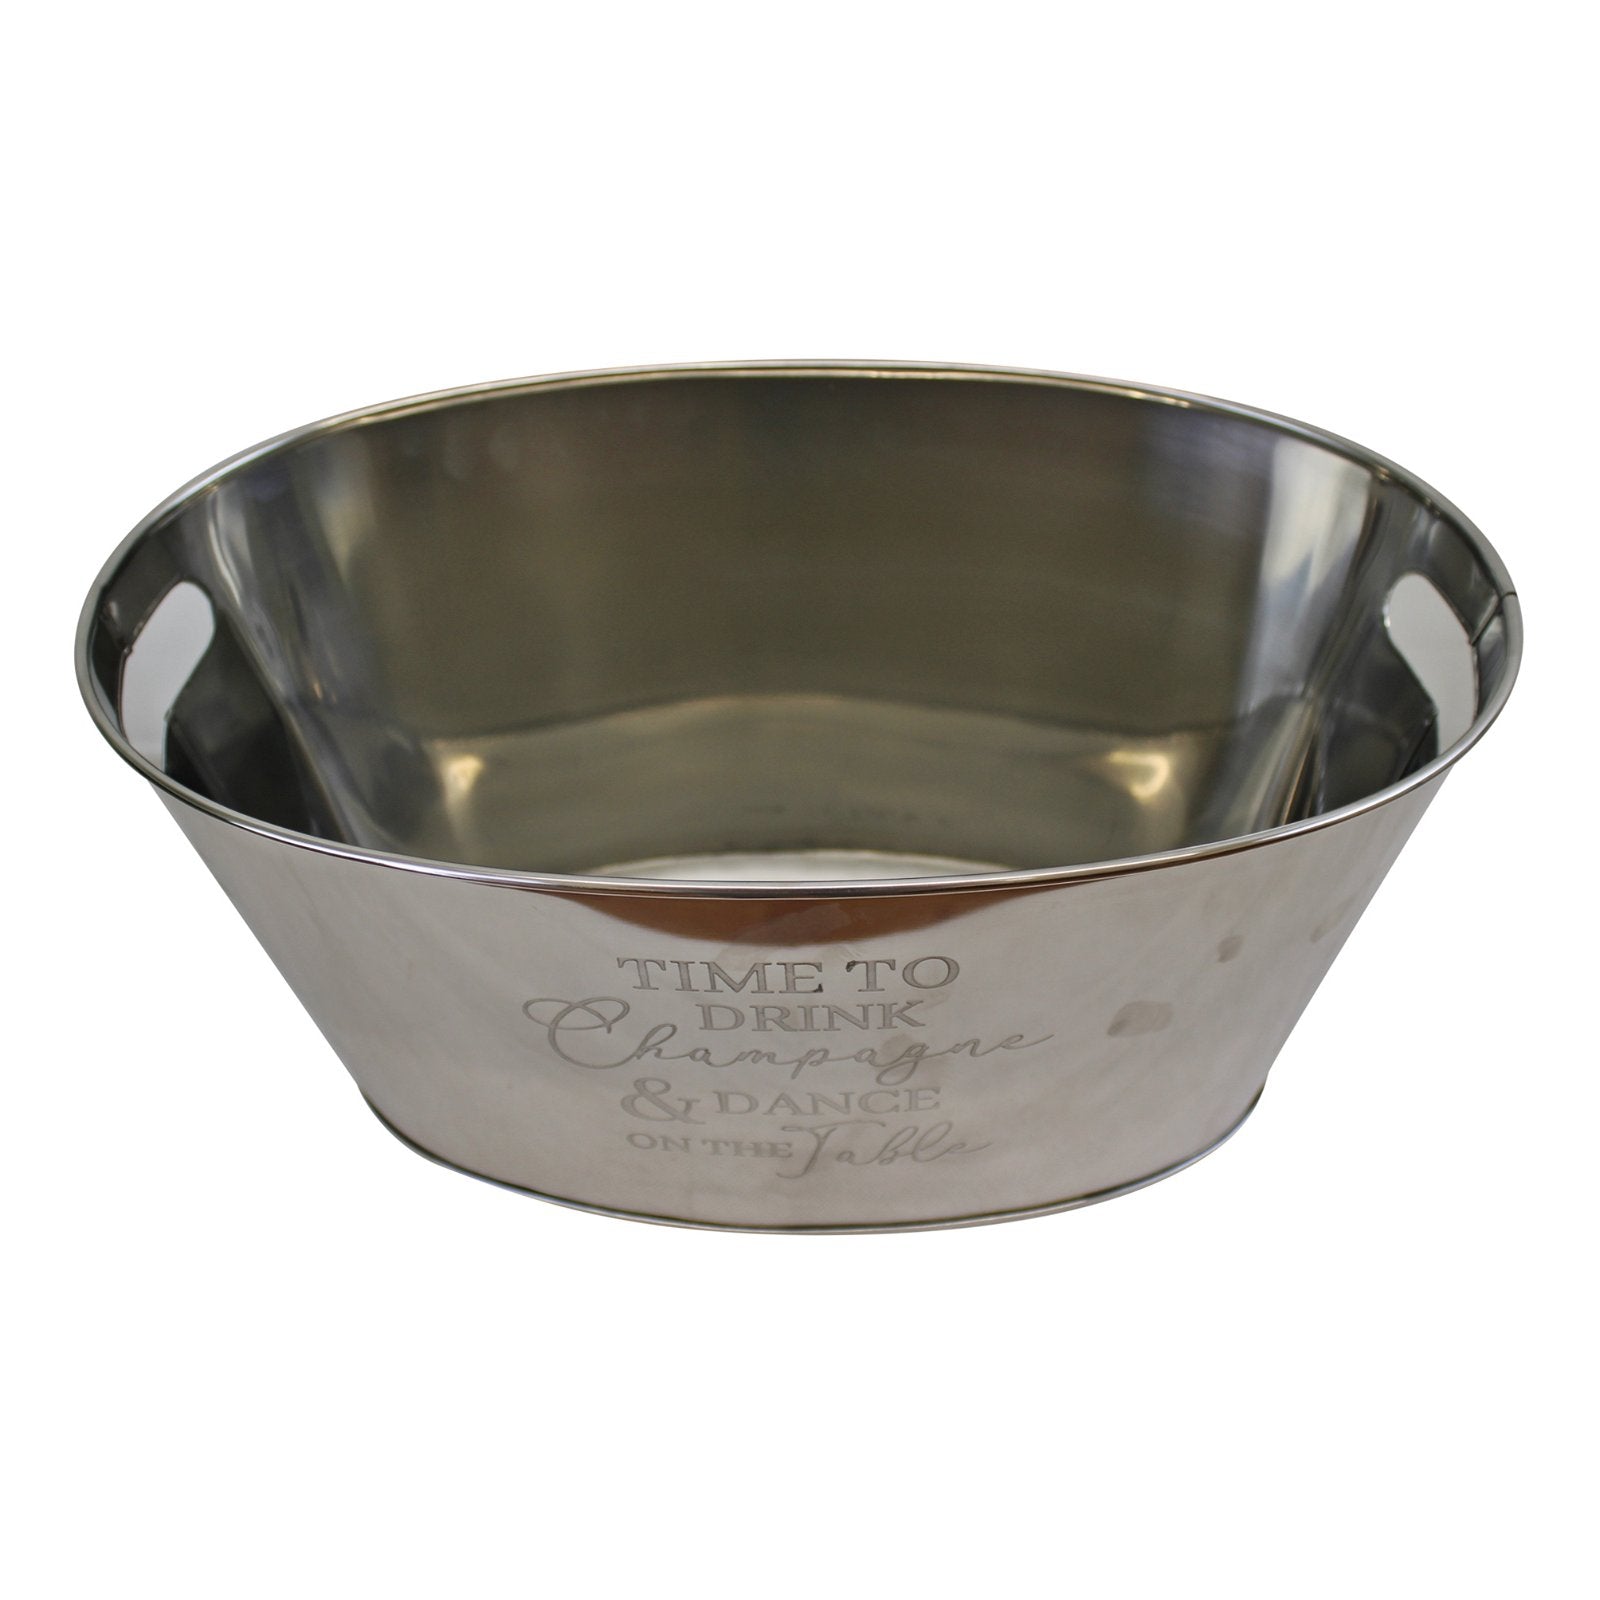 View Stainless Steel Champagne Bucket information